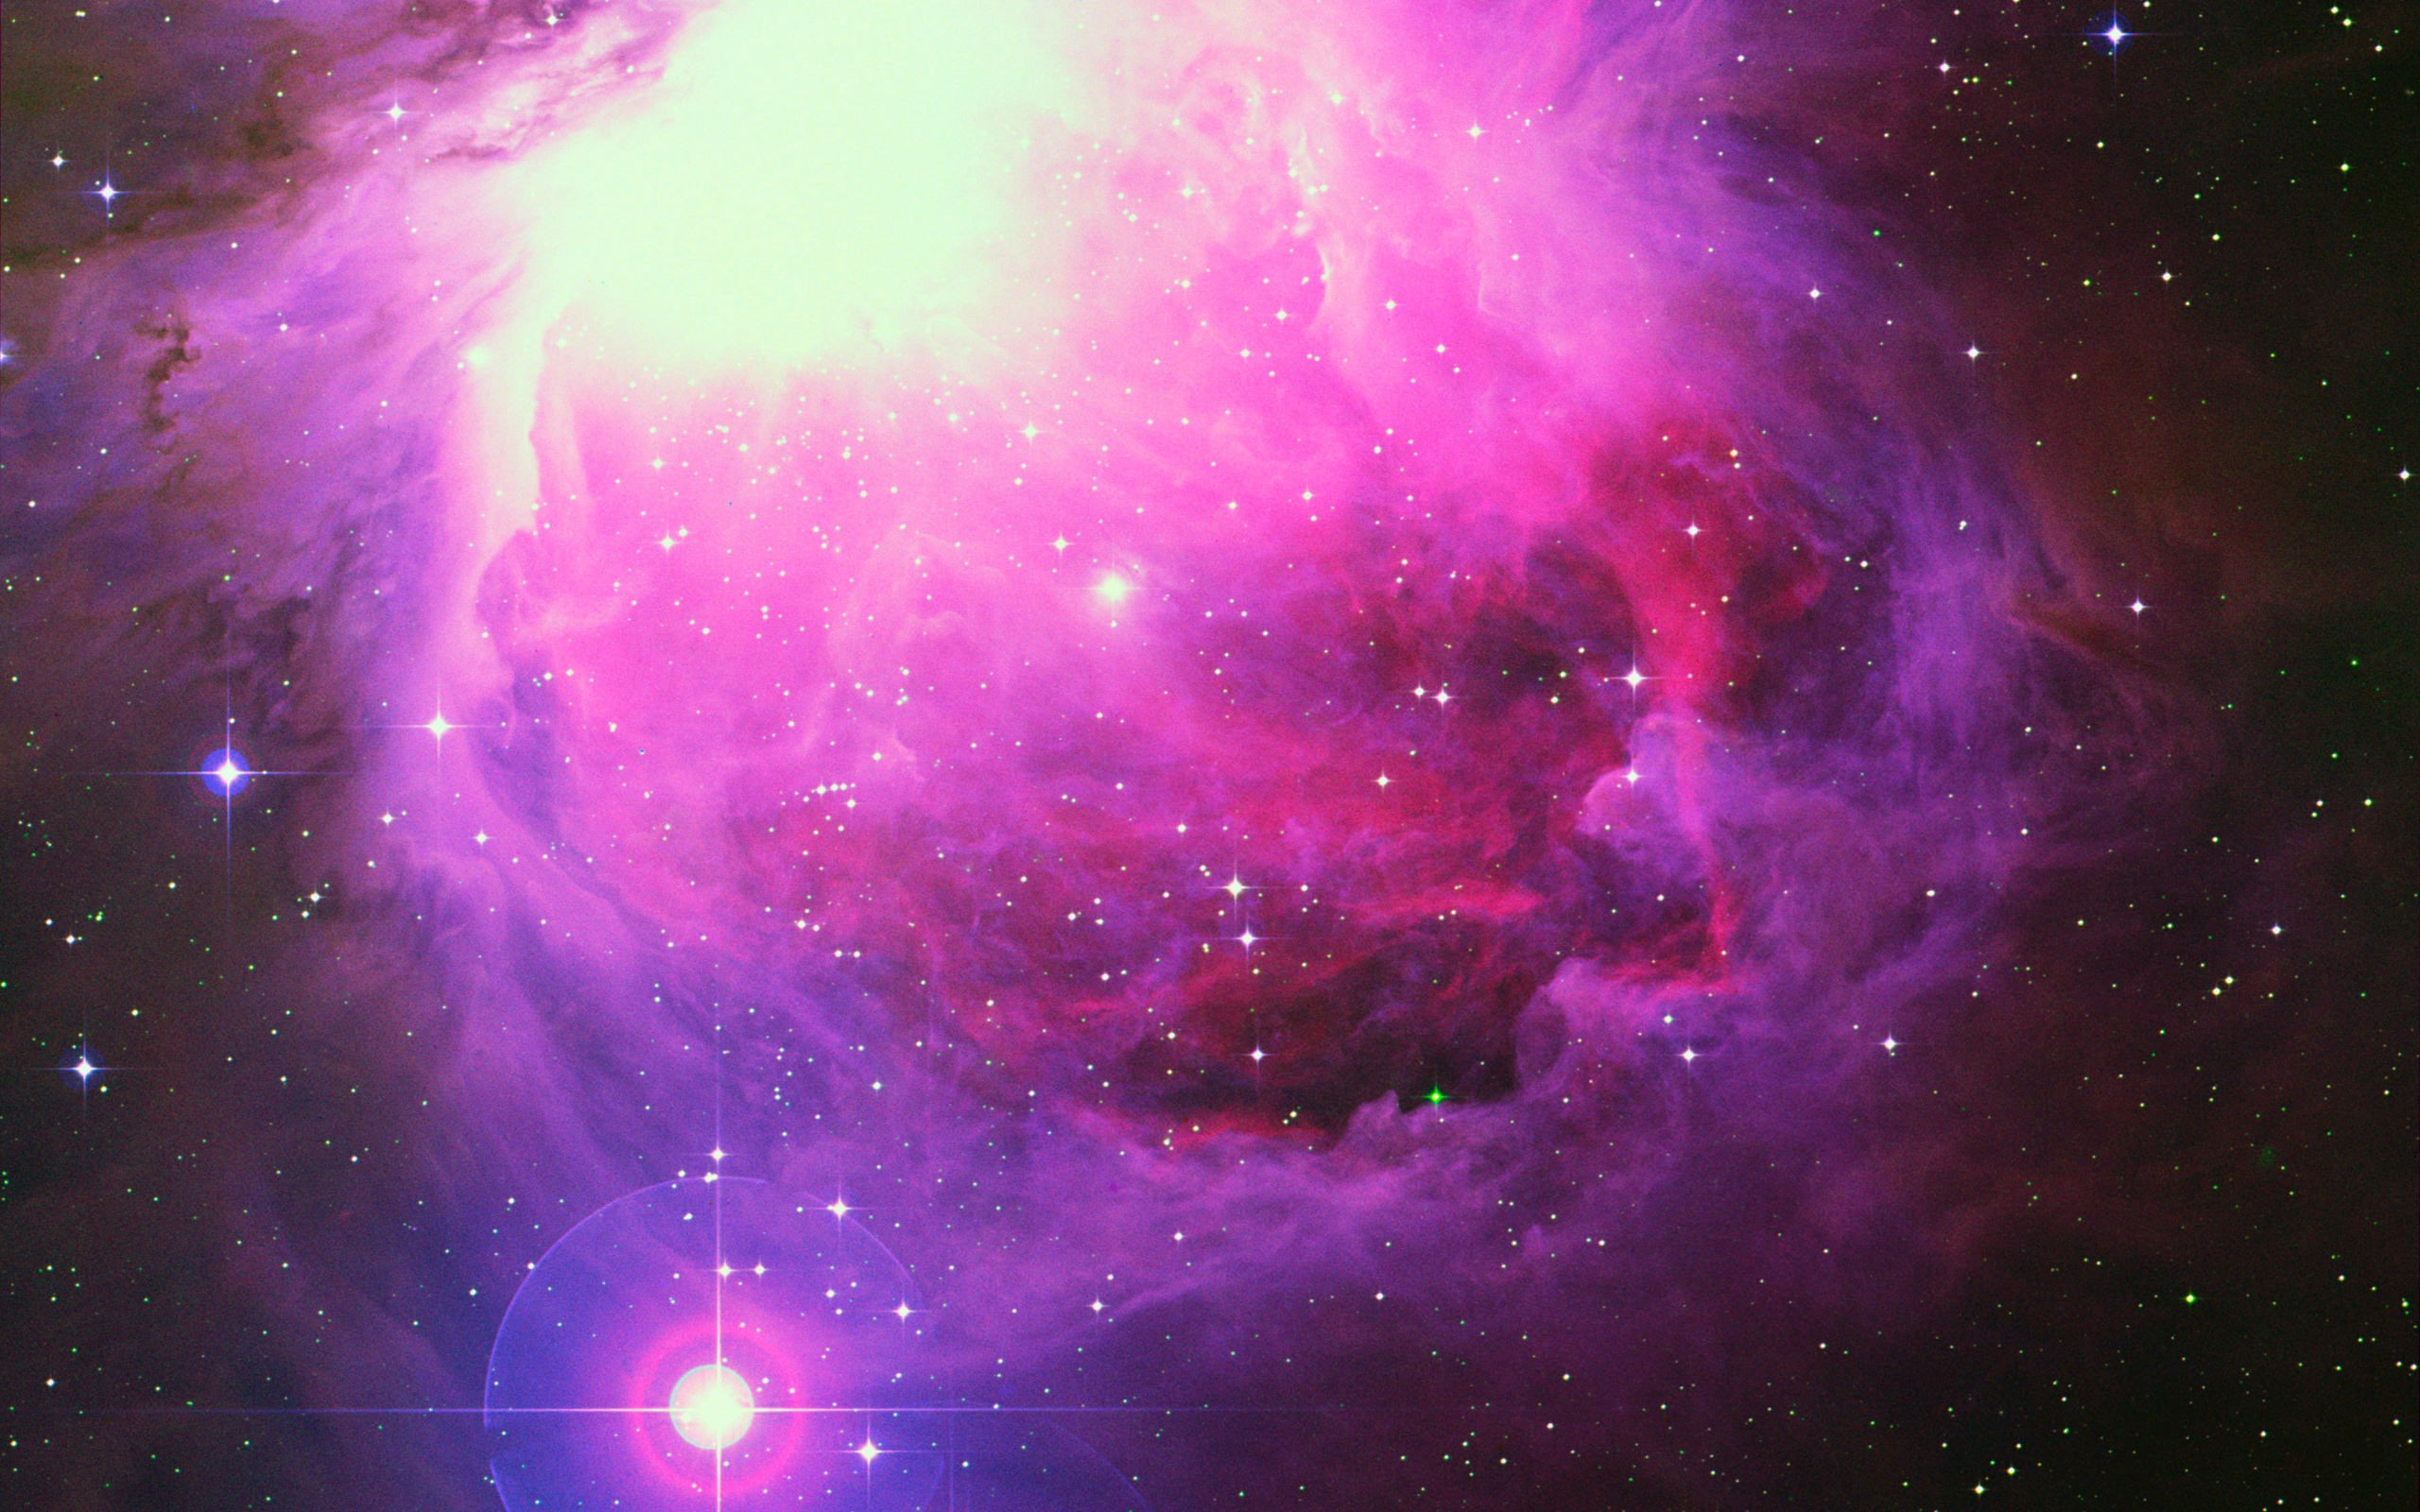 space wallpaper tumblr,nebula,outer space,astronomical object,purple,universe